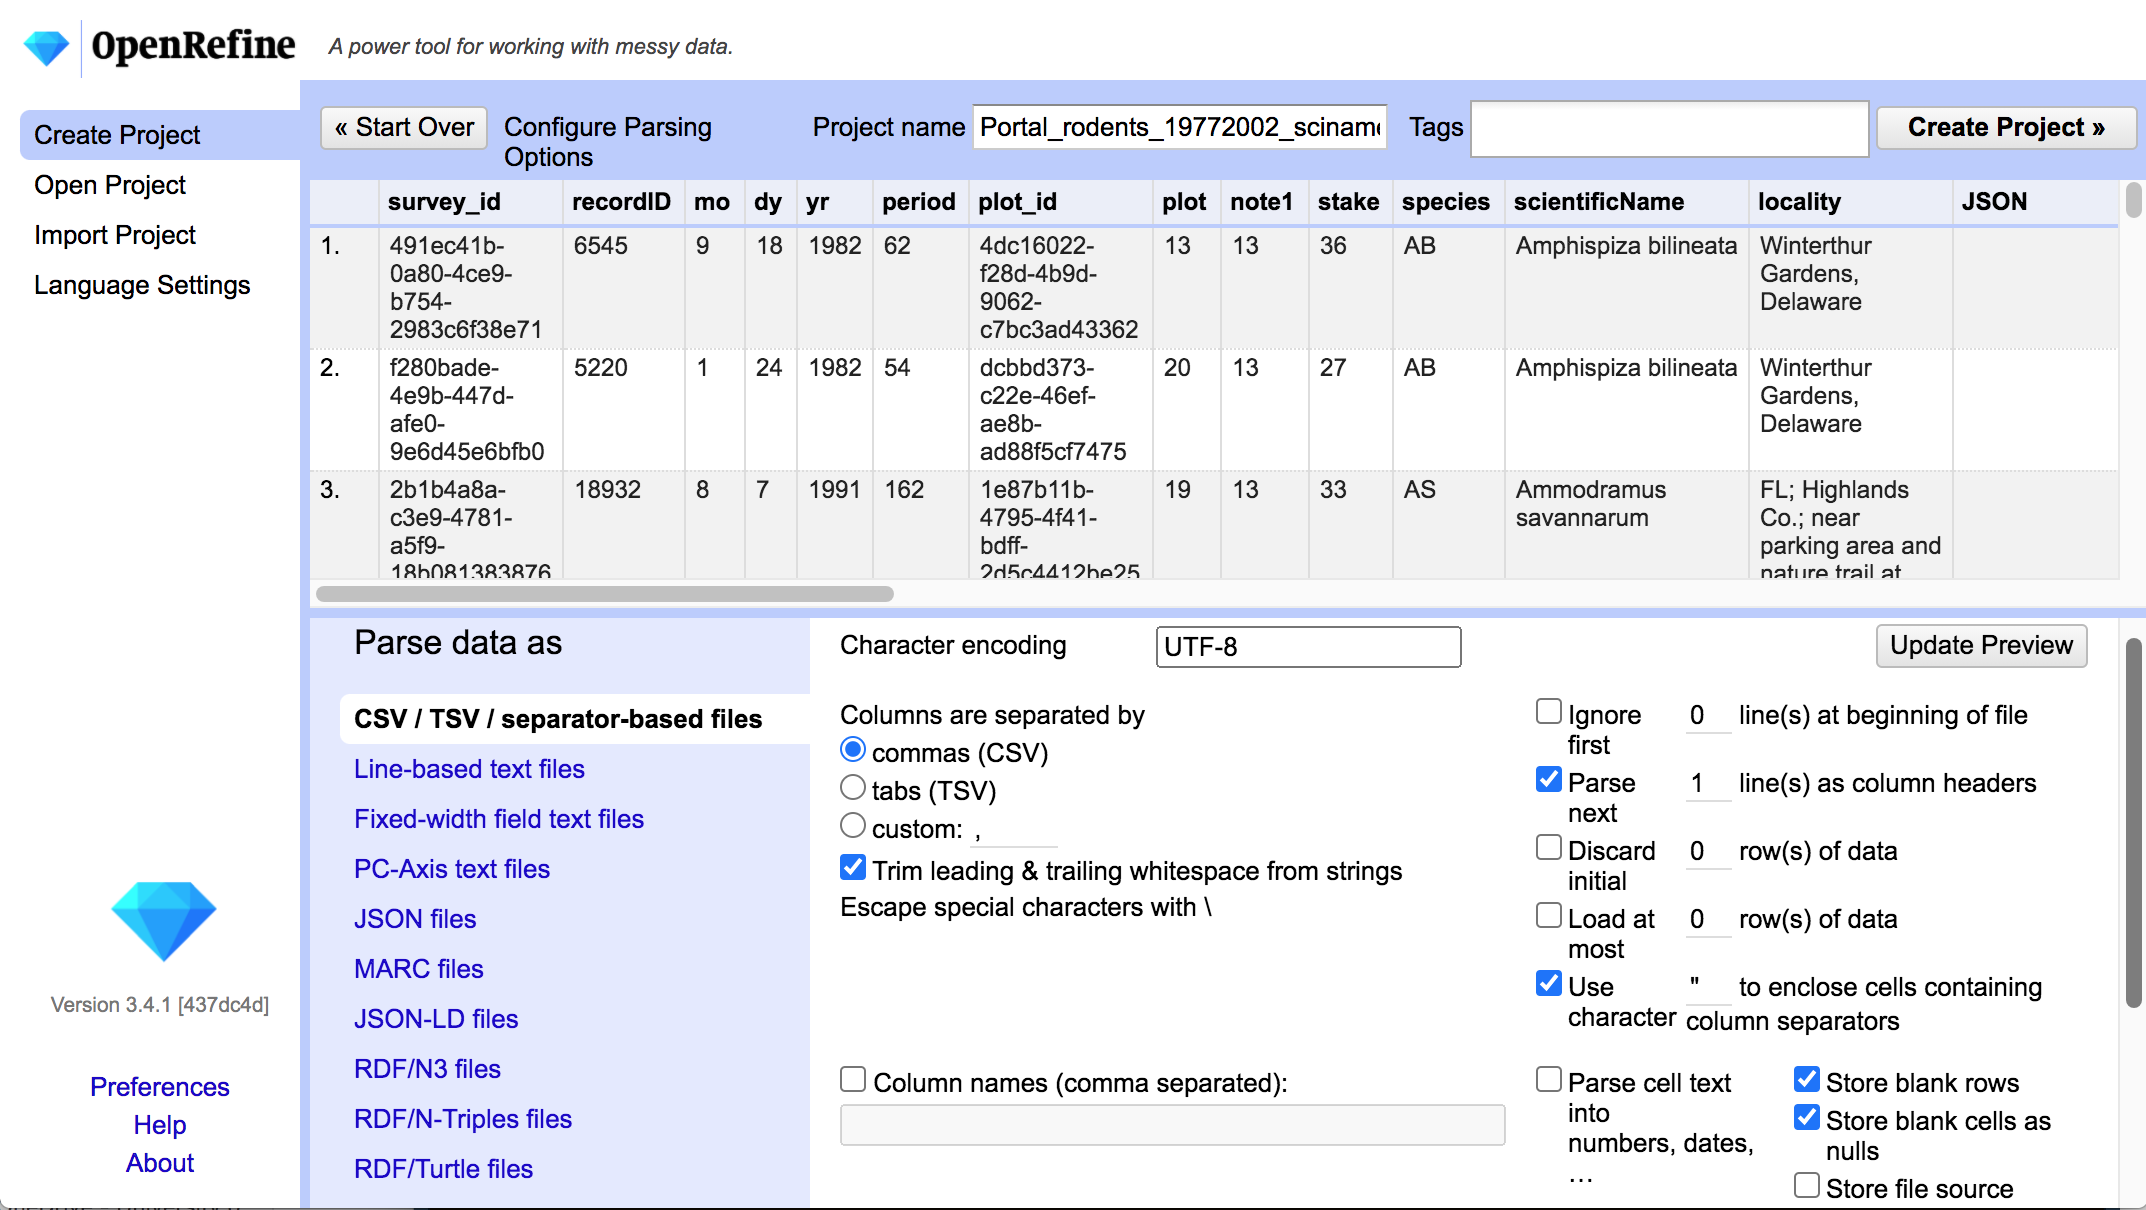 Screenshot of 'OpenRefine' import screen, using the sample data from https://ndownloader.figshare.com/files/7823341, and showing both the tabular preview and the options for parsing the headers and delimiters.